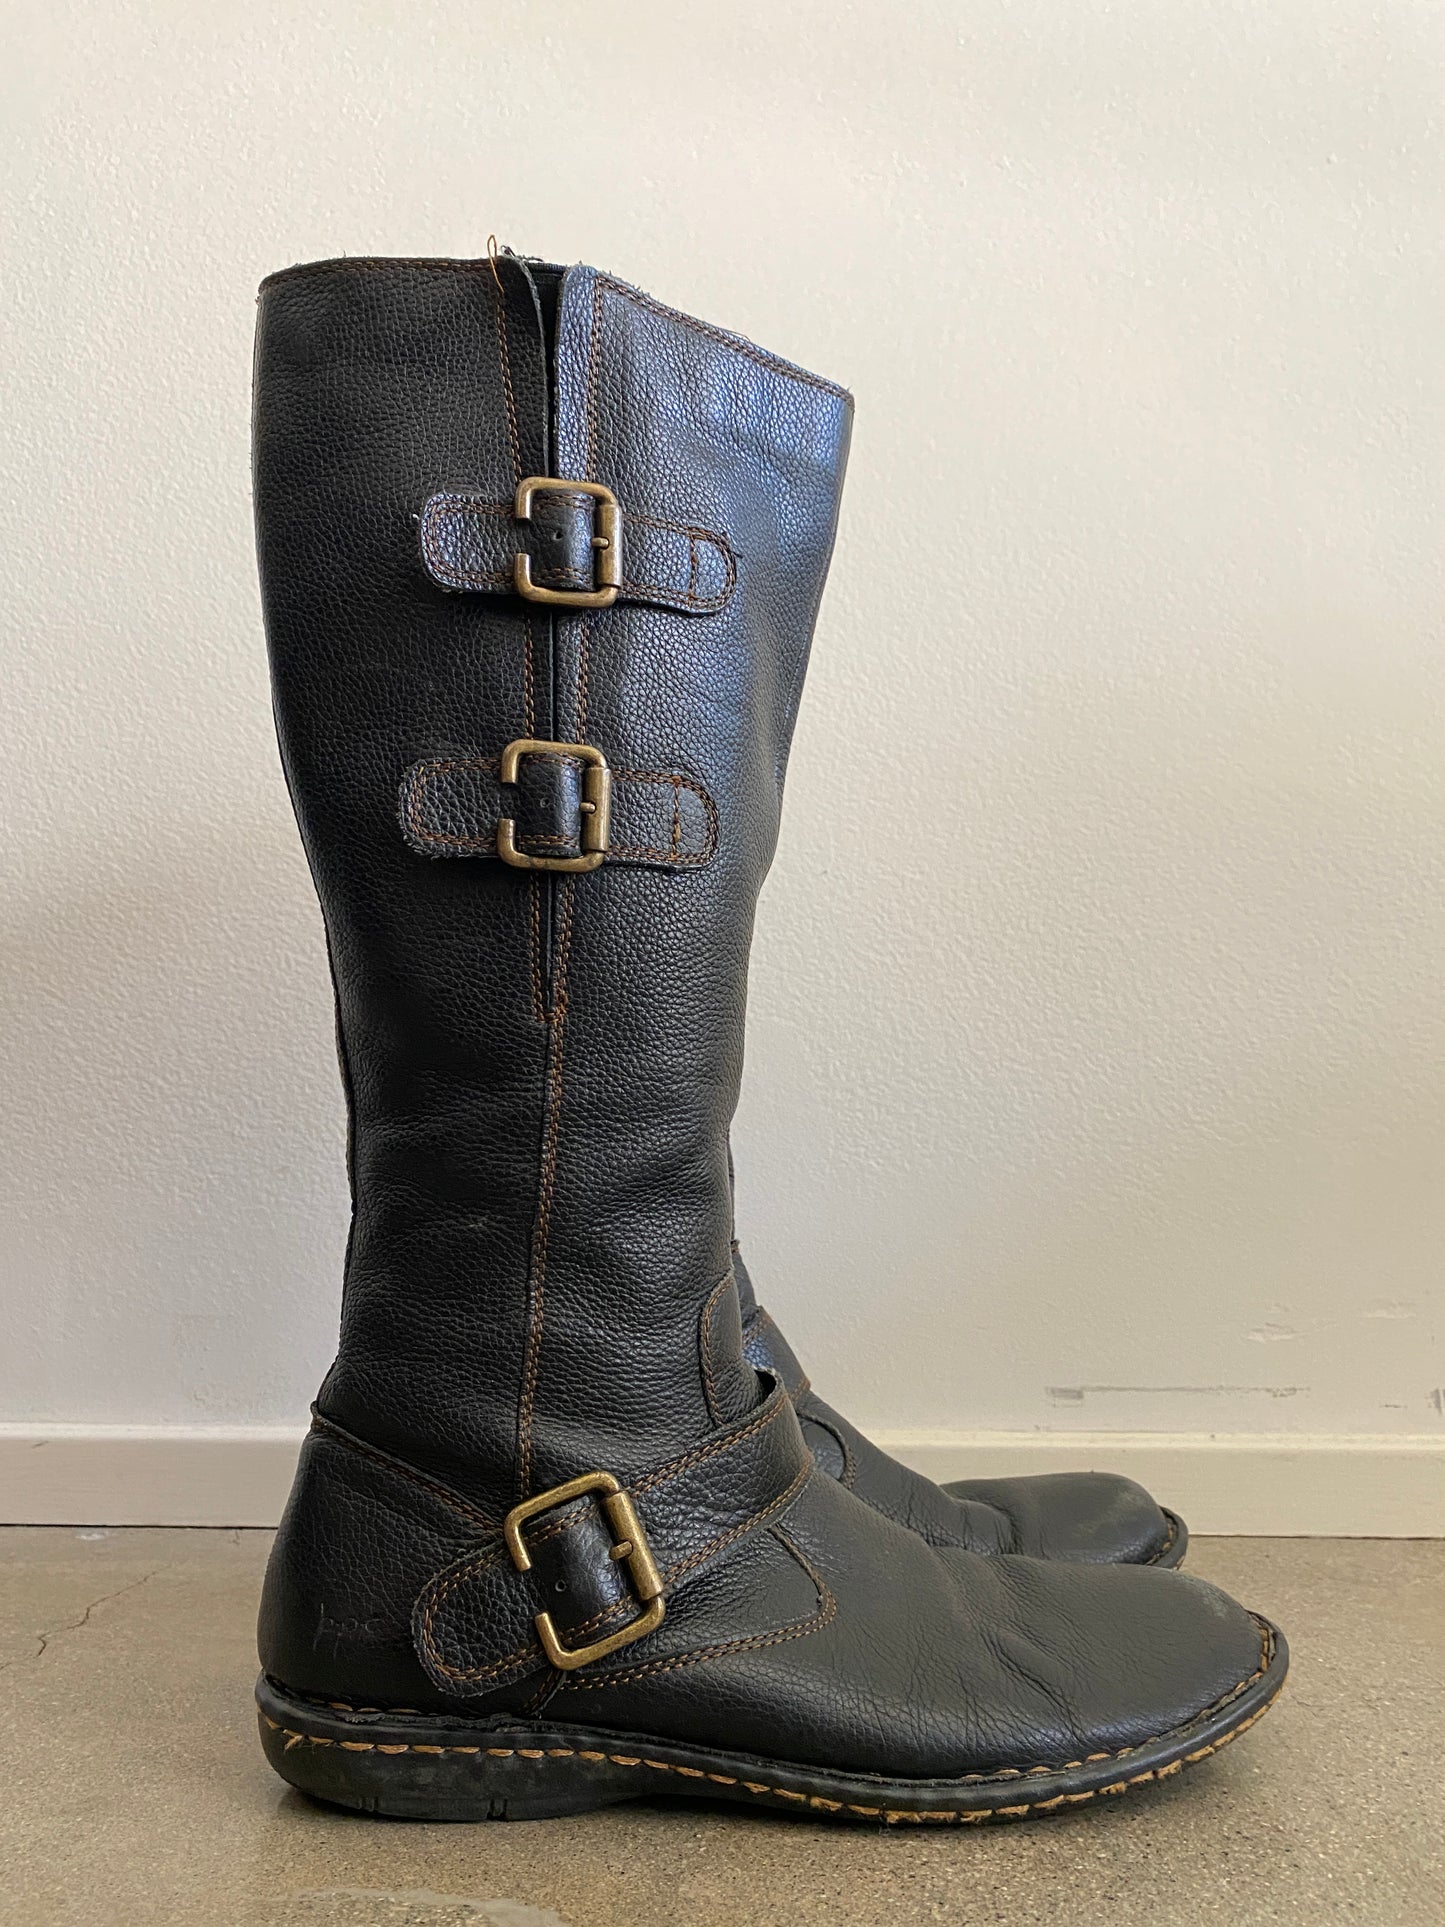 00's Black Leather Buckle Boots